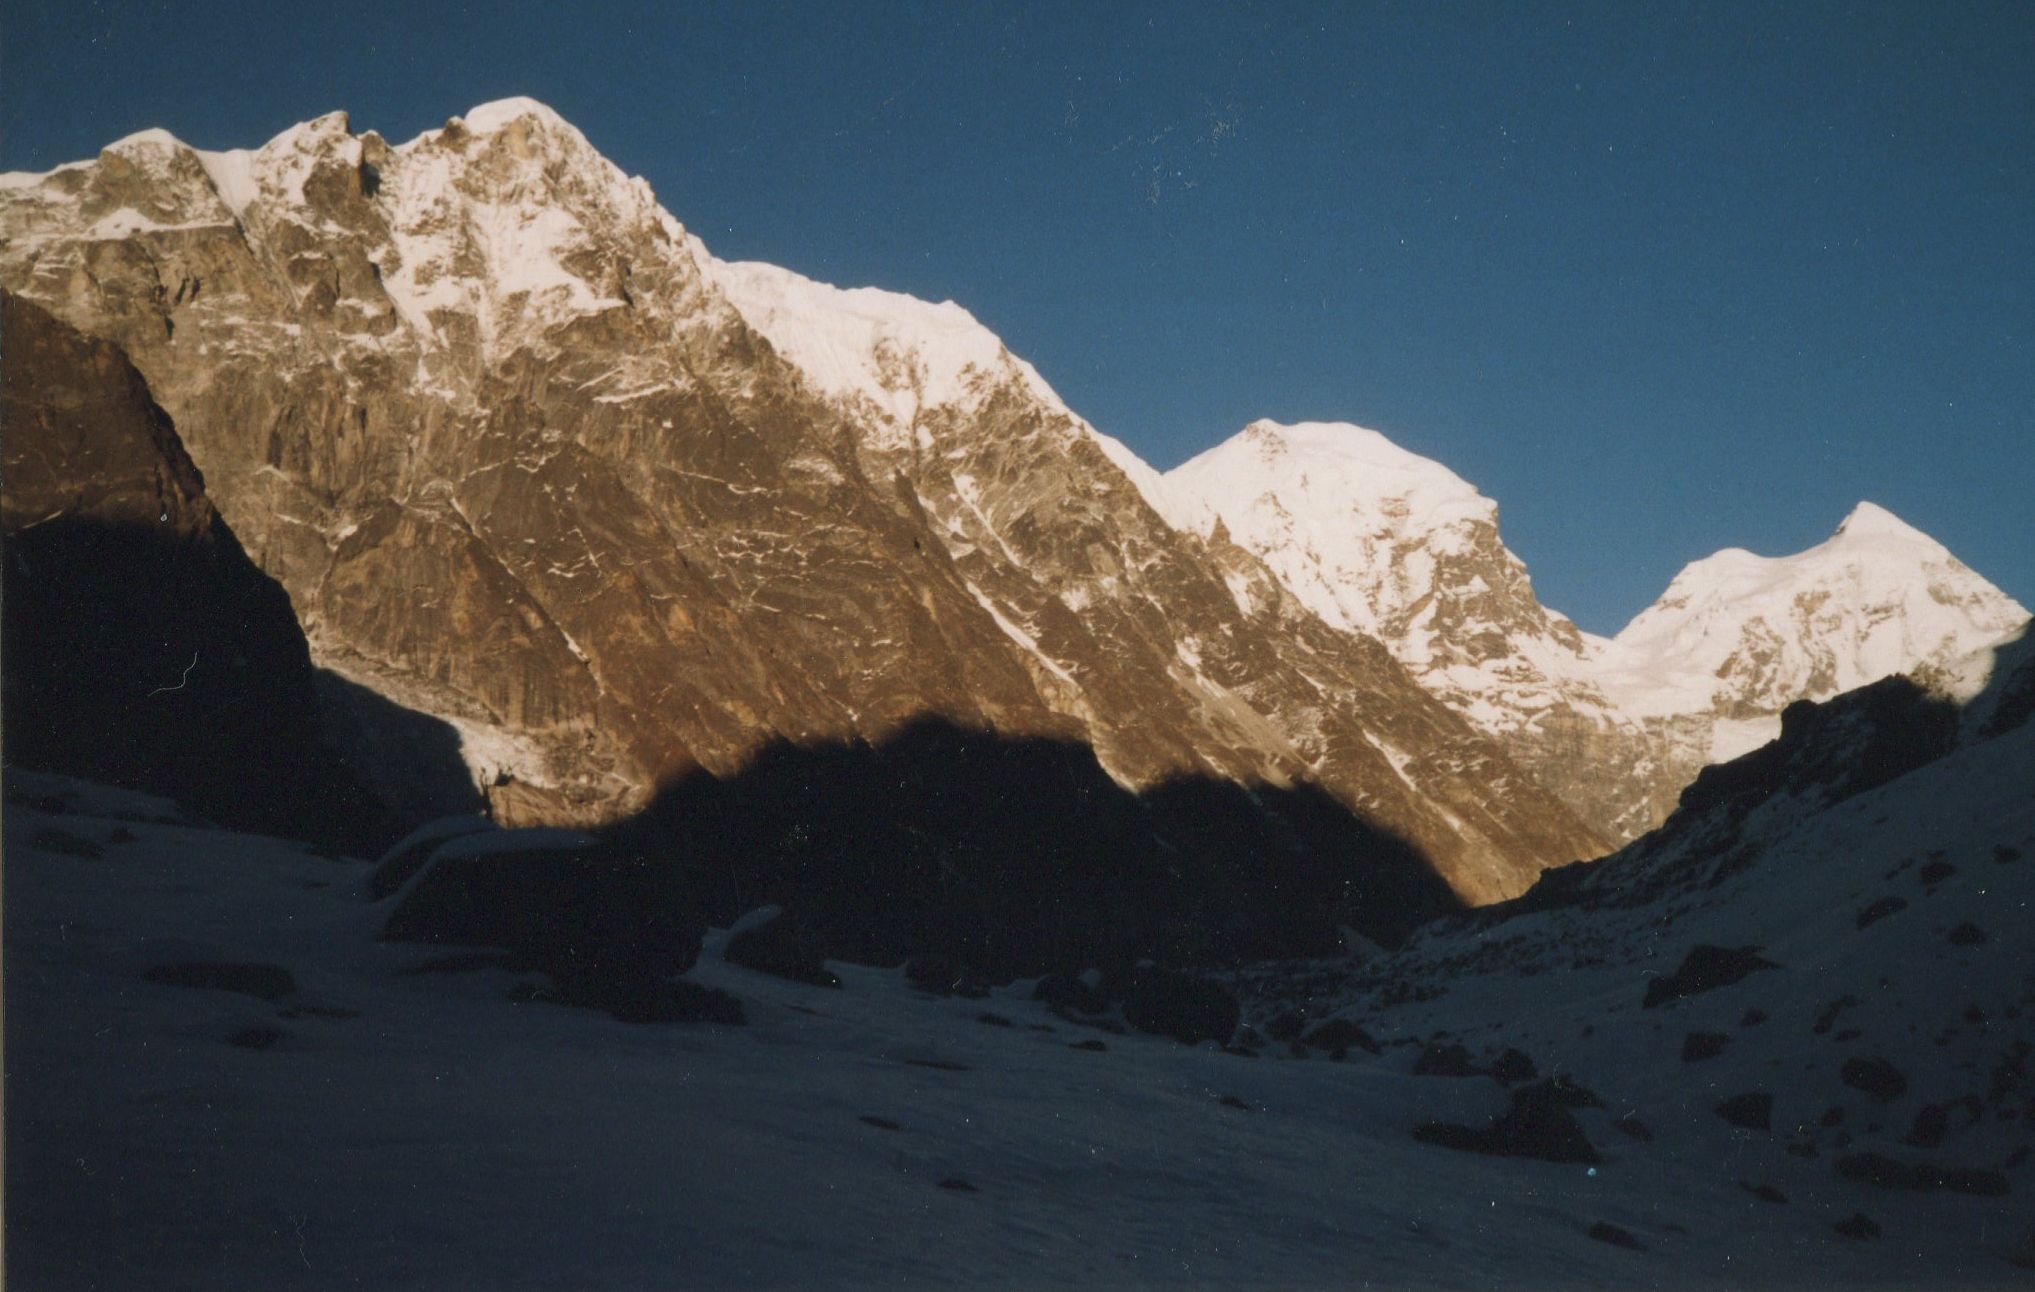 Peaks in Langtang Himal on descent from Tilman's Pass